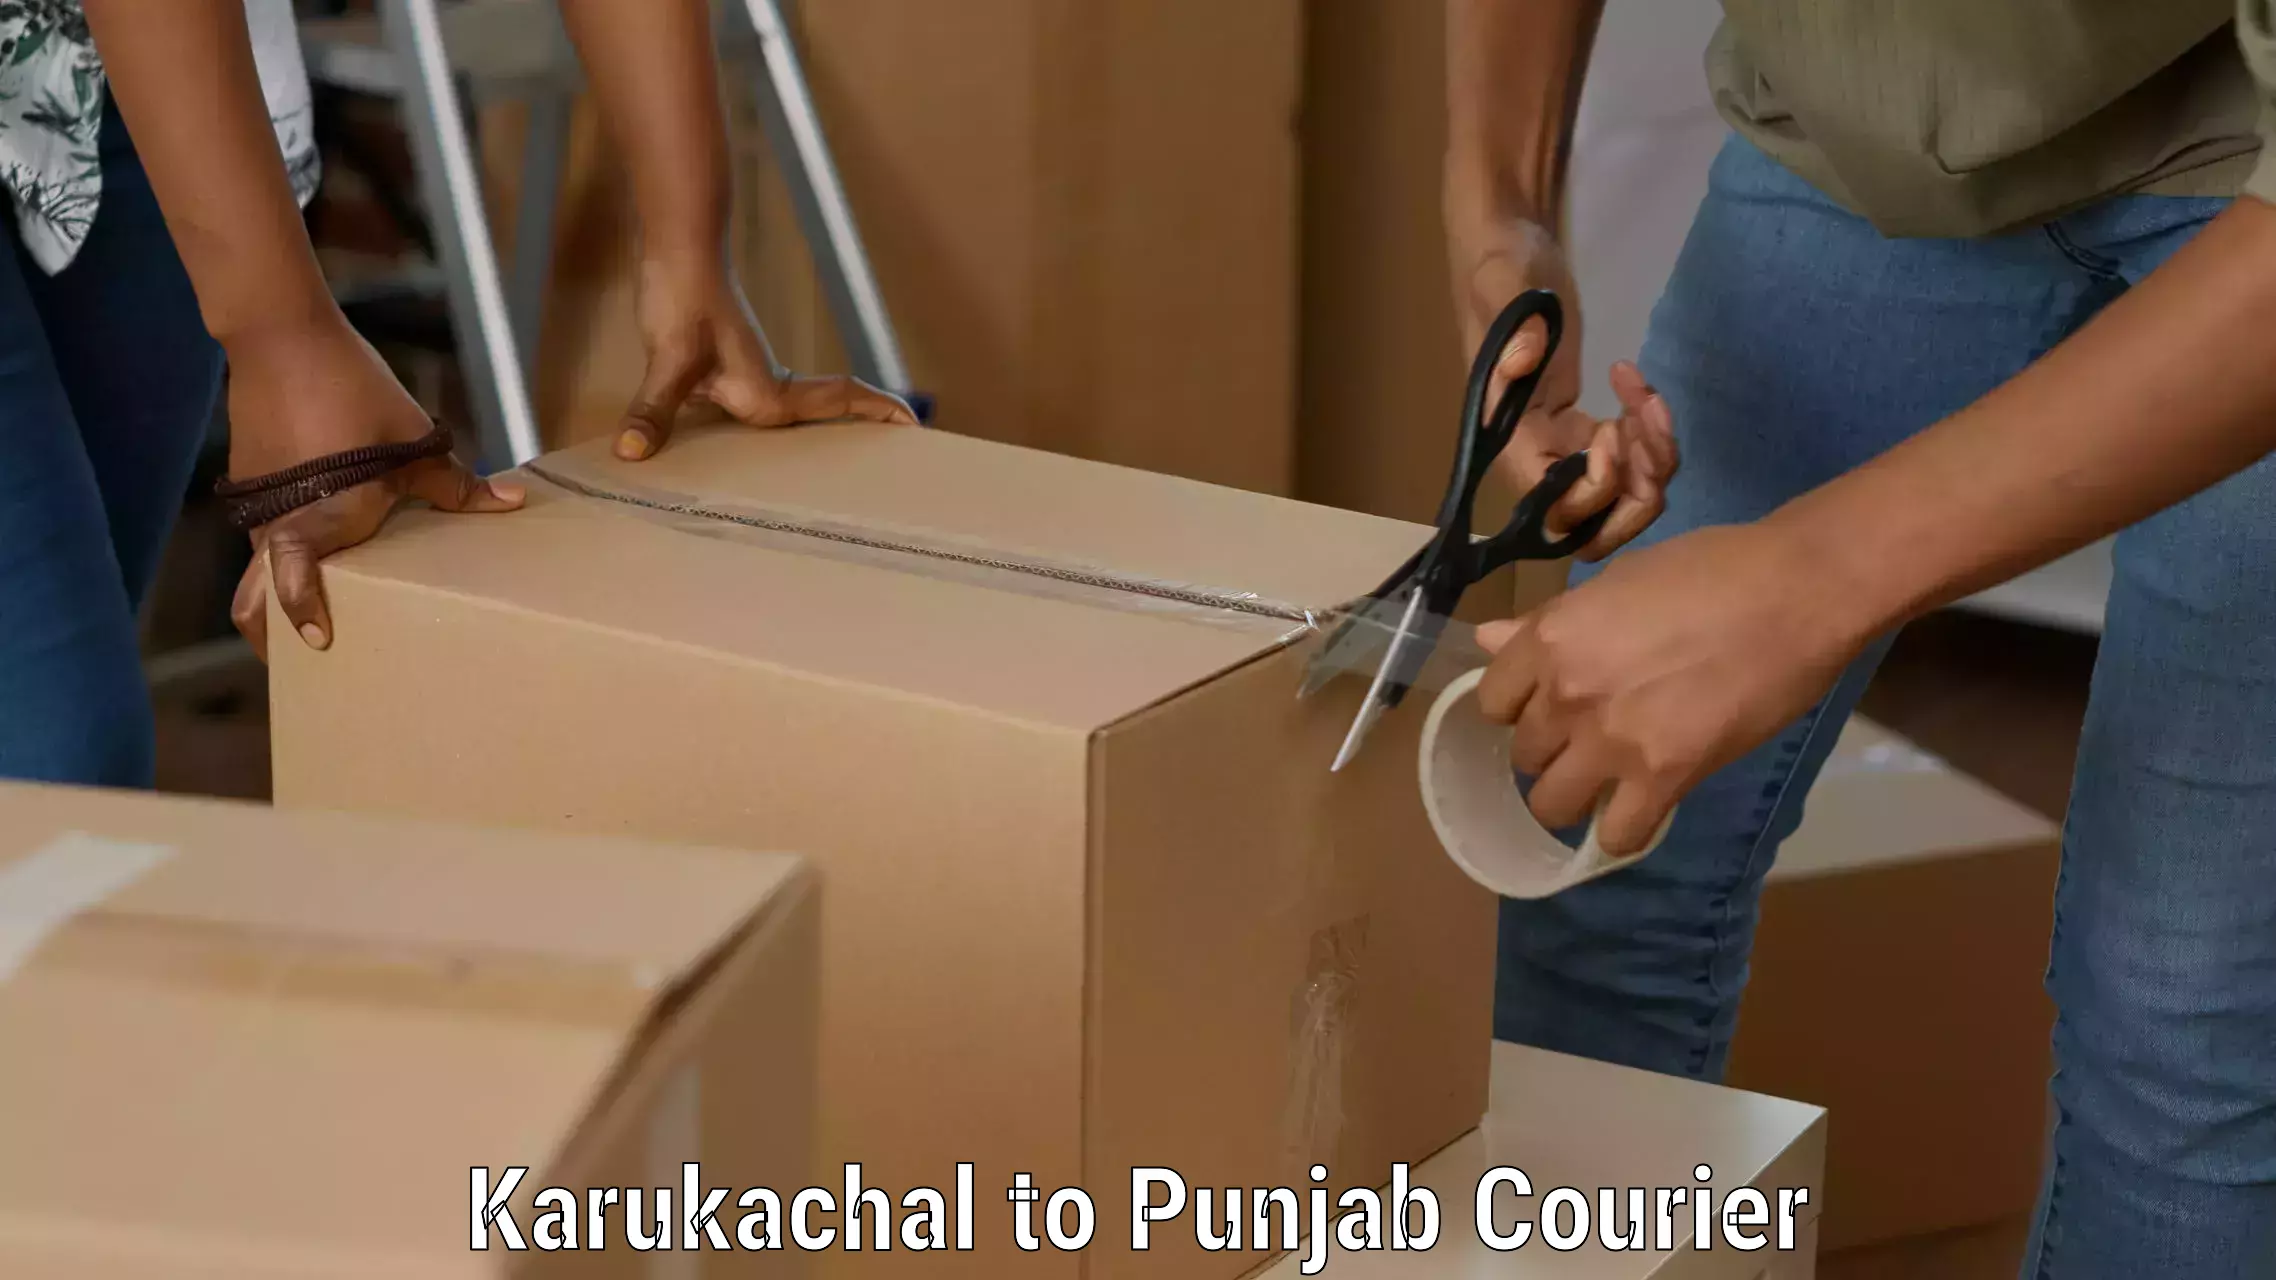 Overnight delivery services Karukachal to Central University of Punjab Bathinda